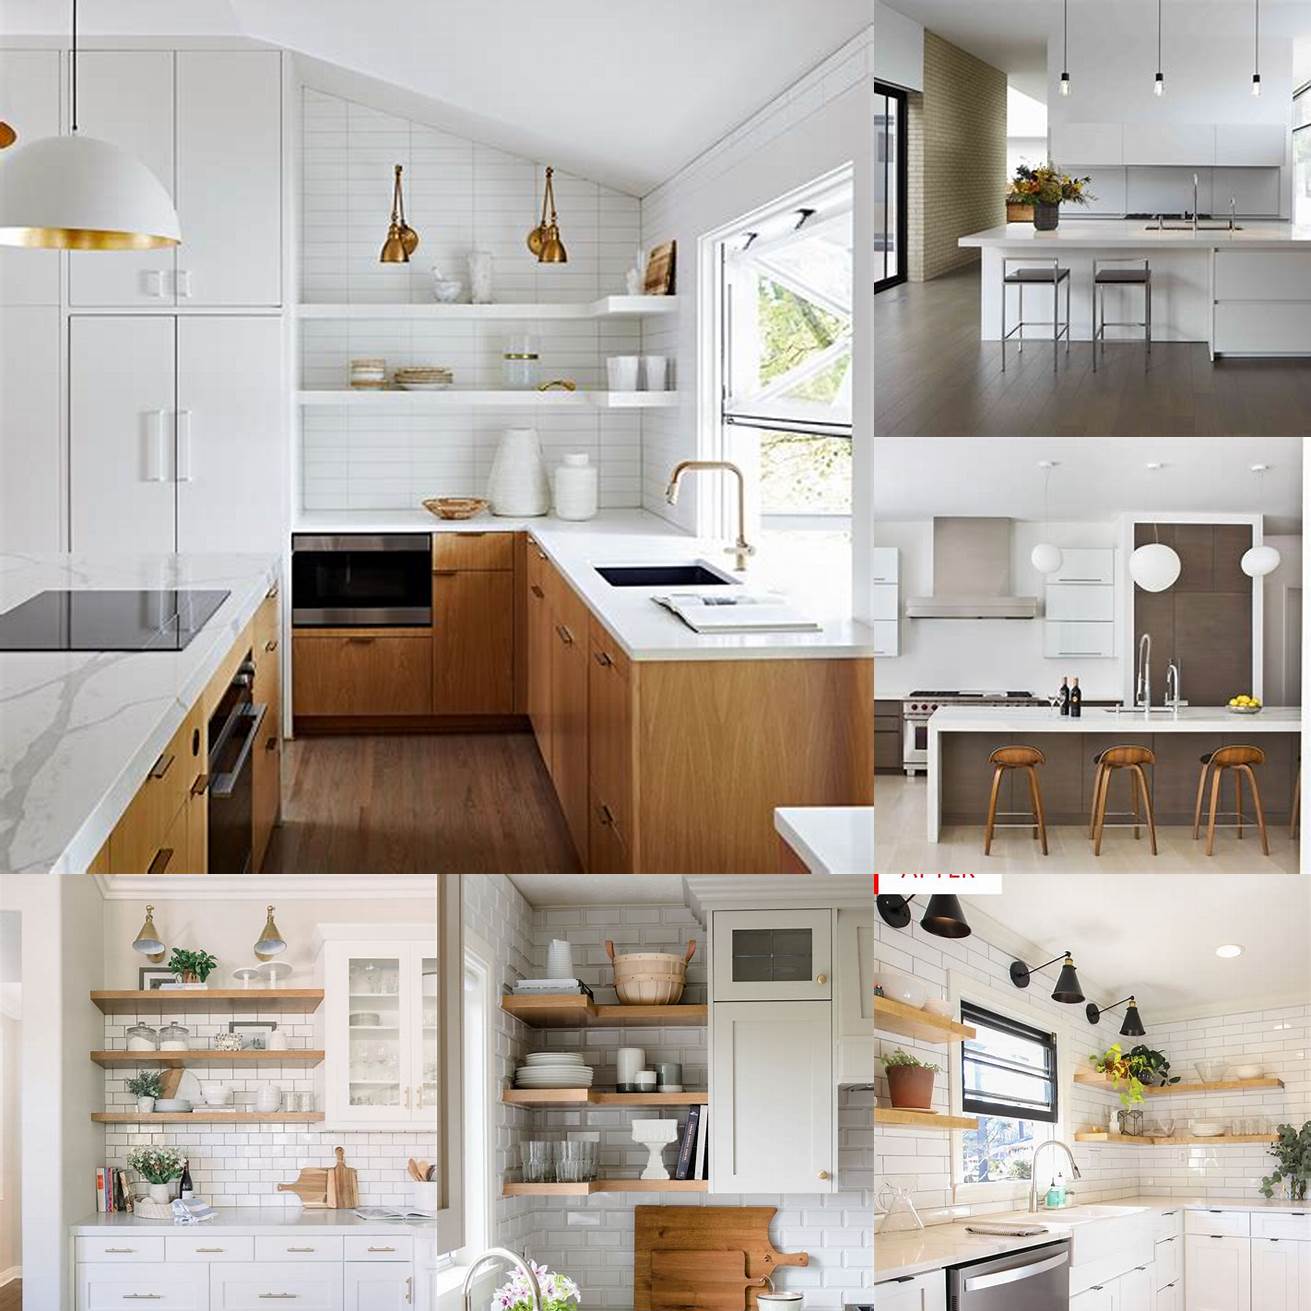 Minimalist white kitchen with sleek cabinetry and open shelving